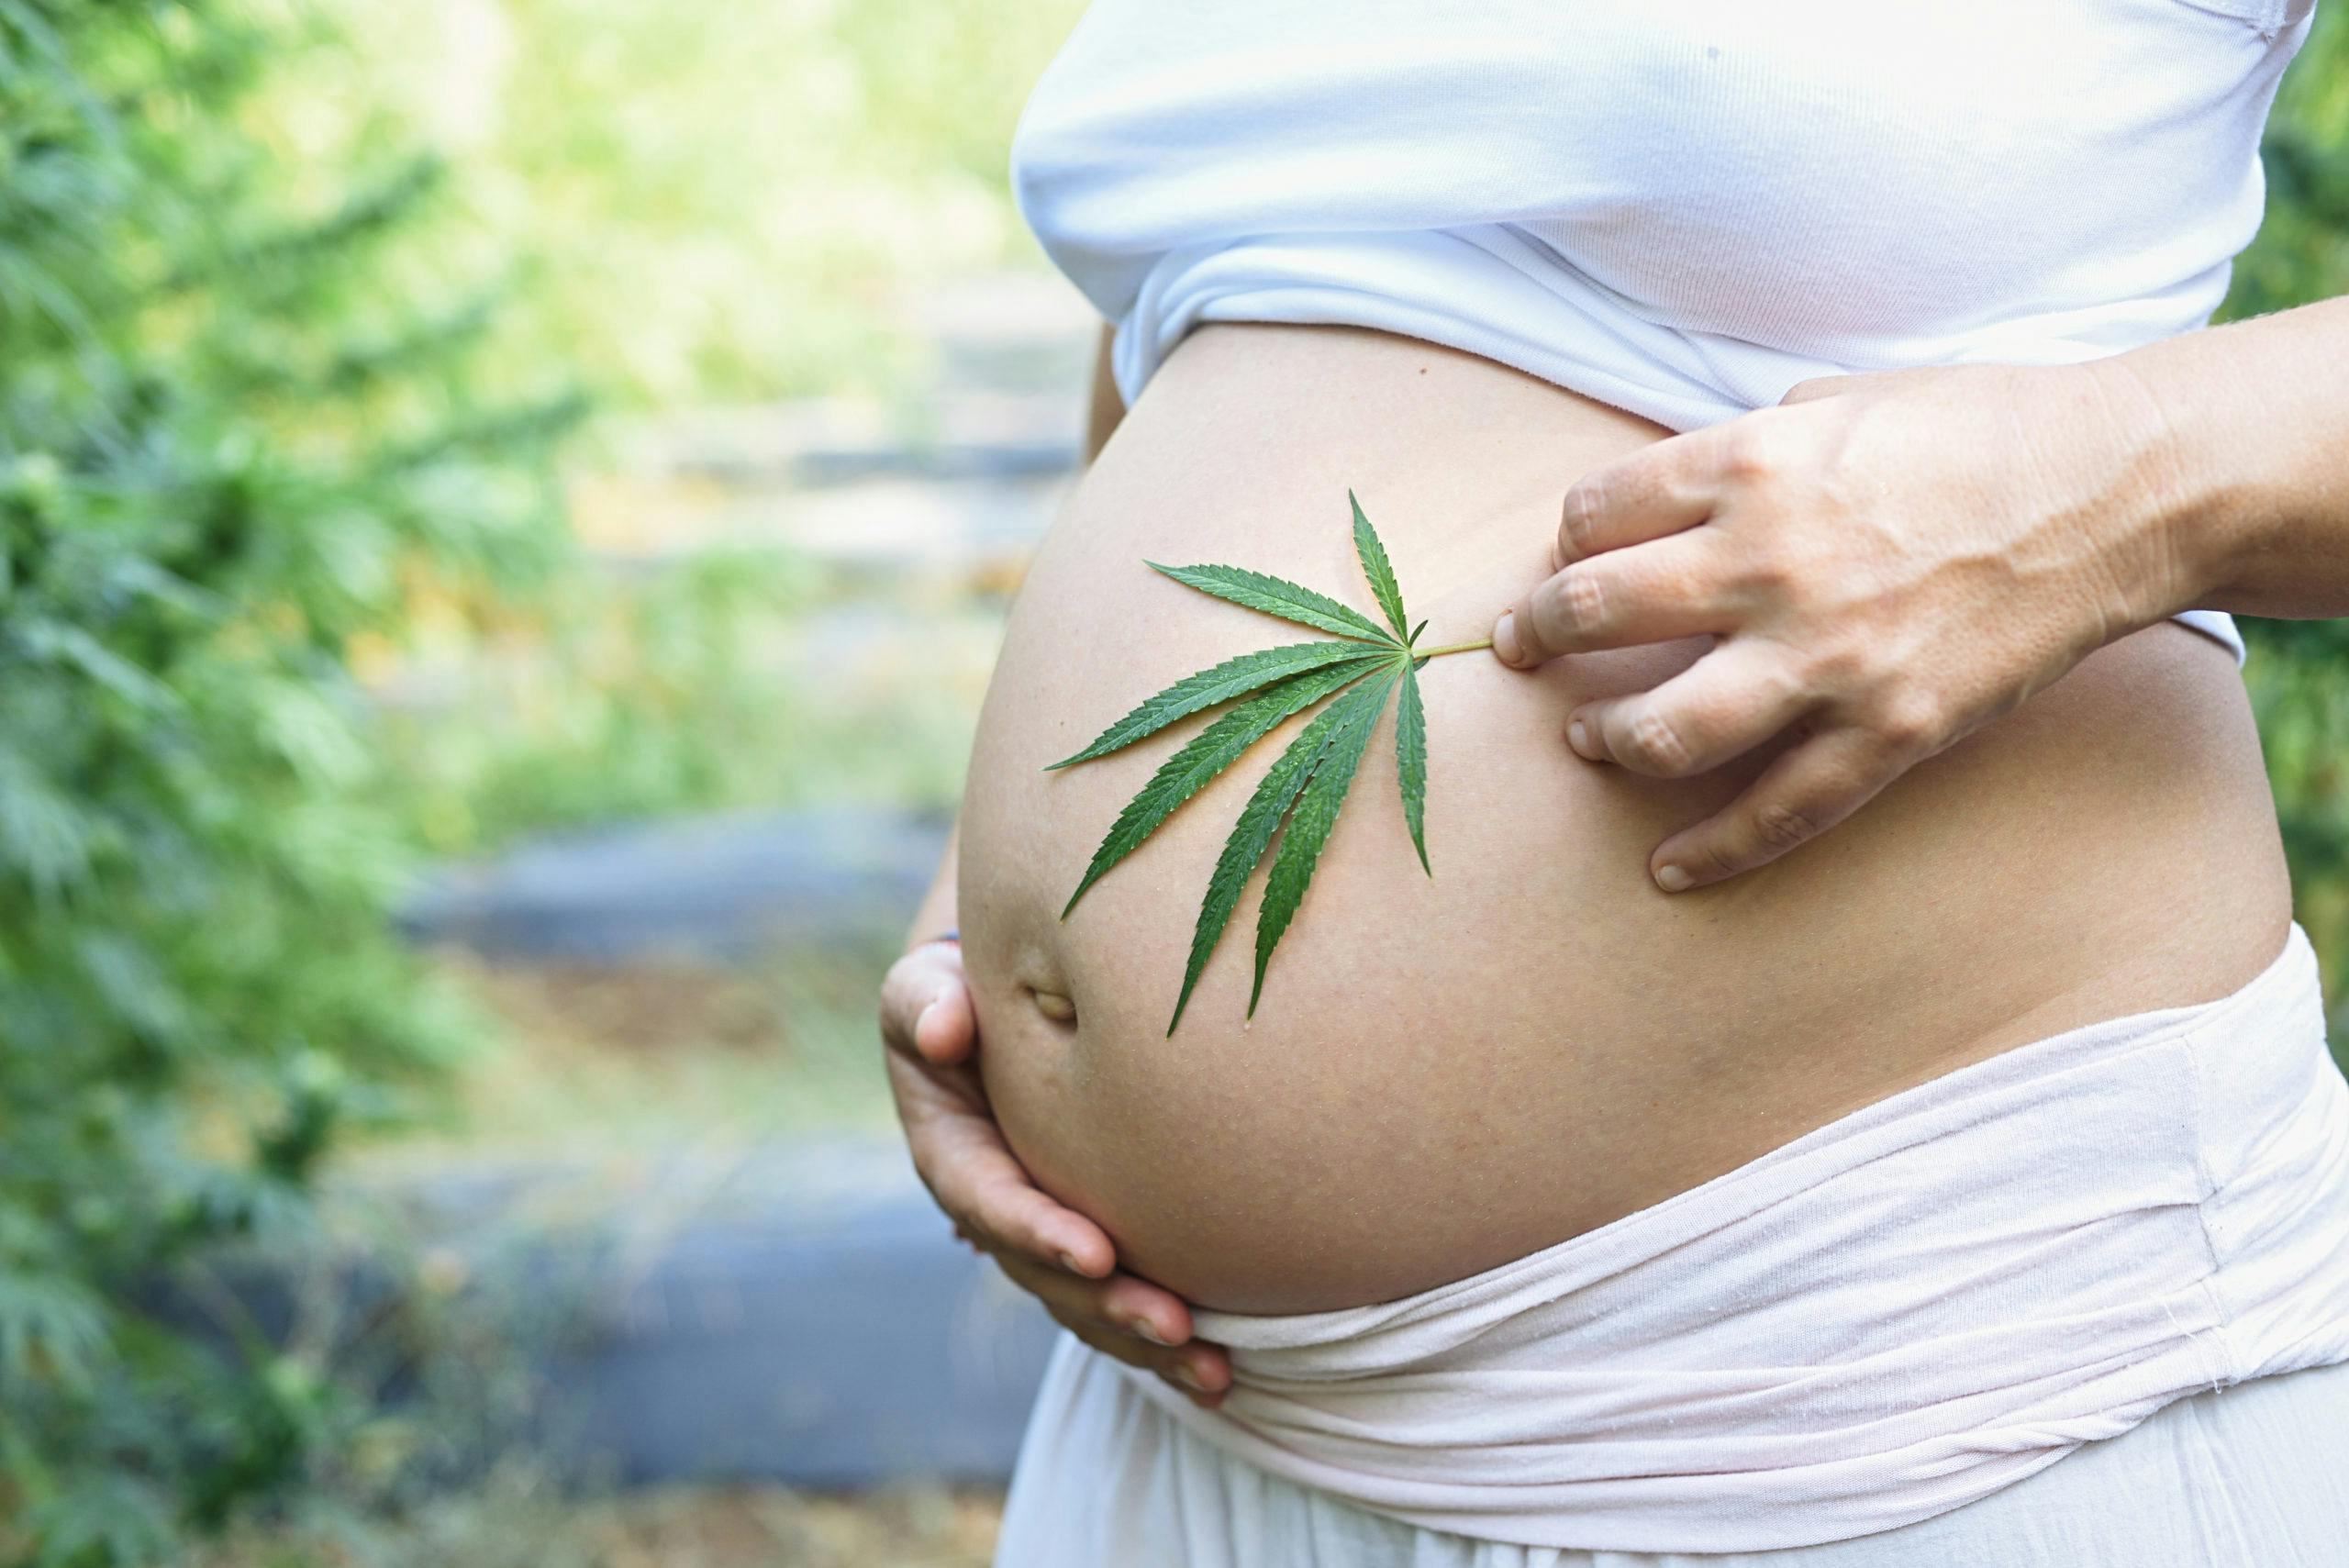 Alabama Bill Would Require Pregnancy Tests for Medical Cannabis Patients